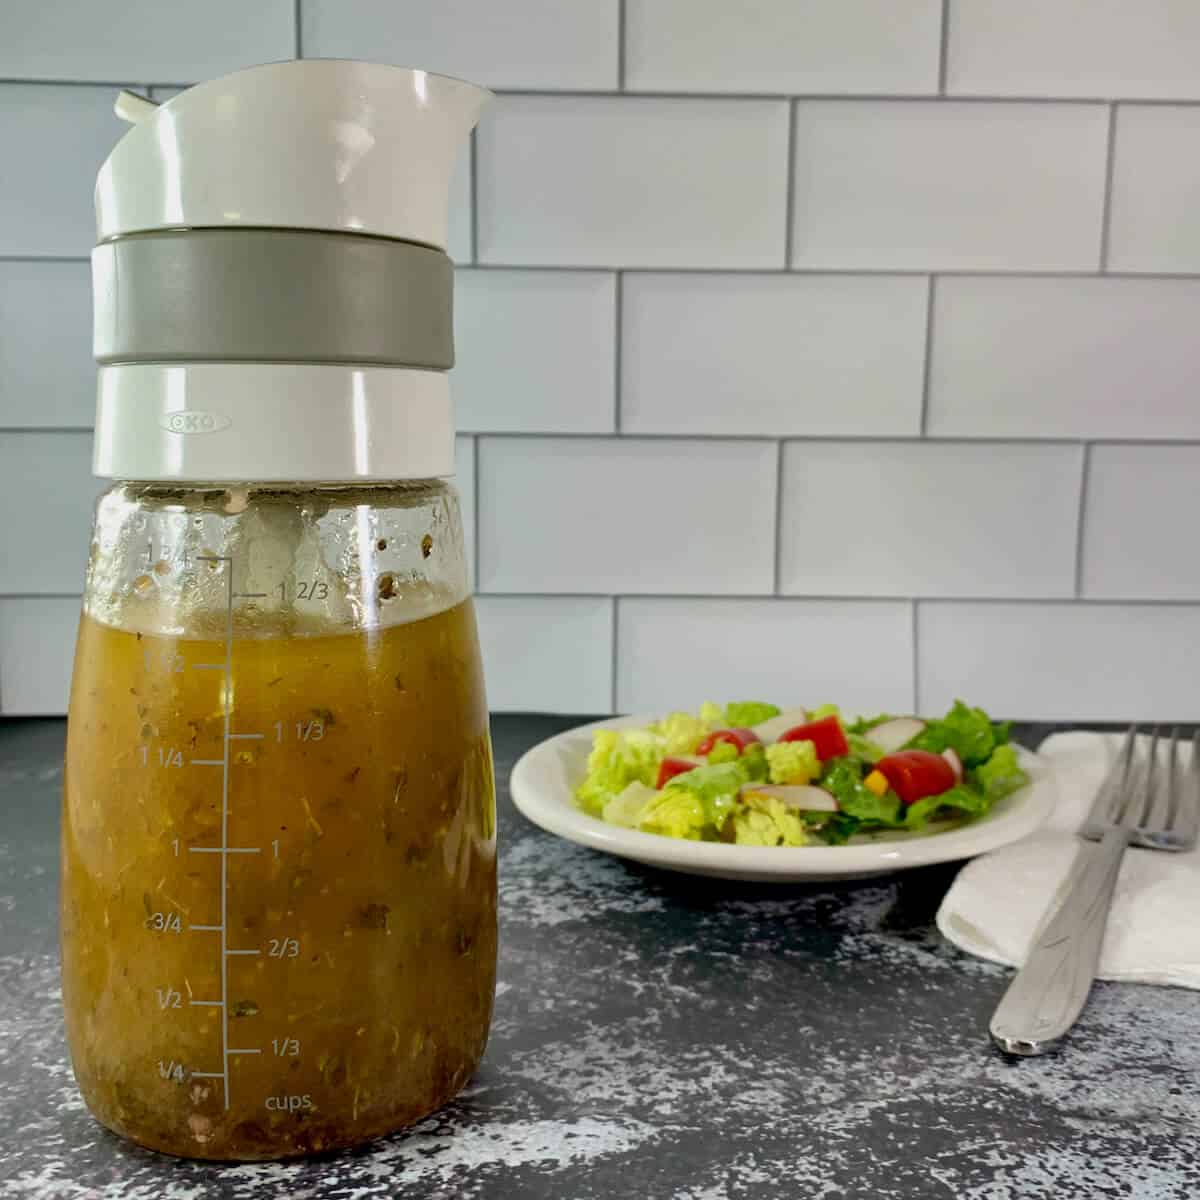 bottle of herb vinaigrette in foreground and salad in background